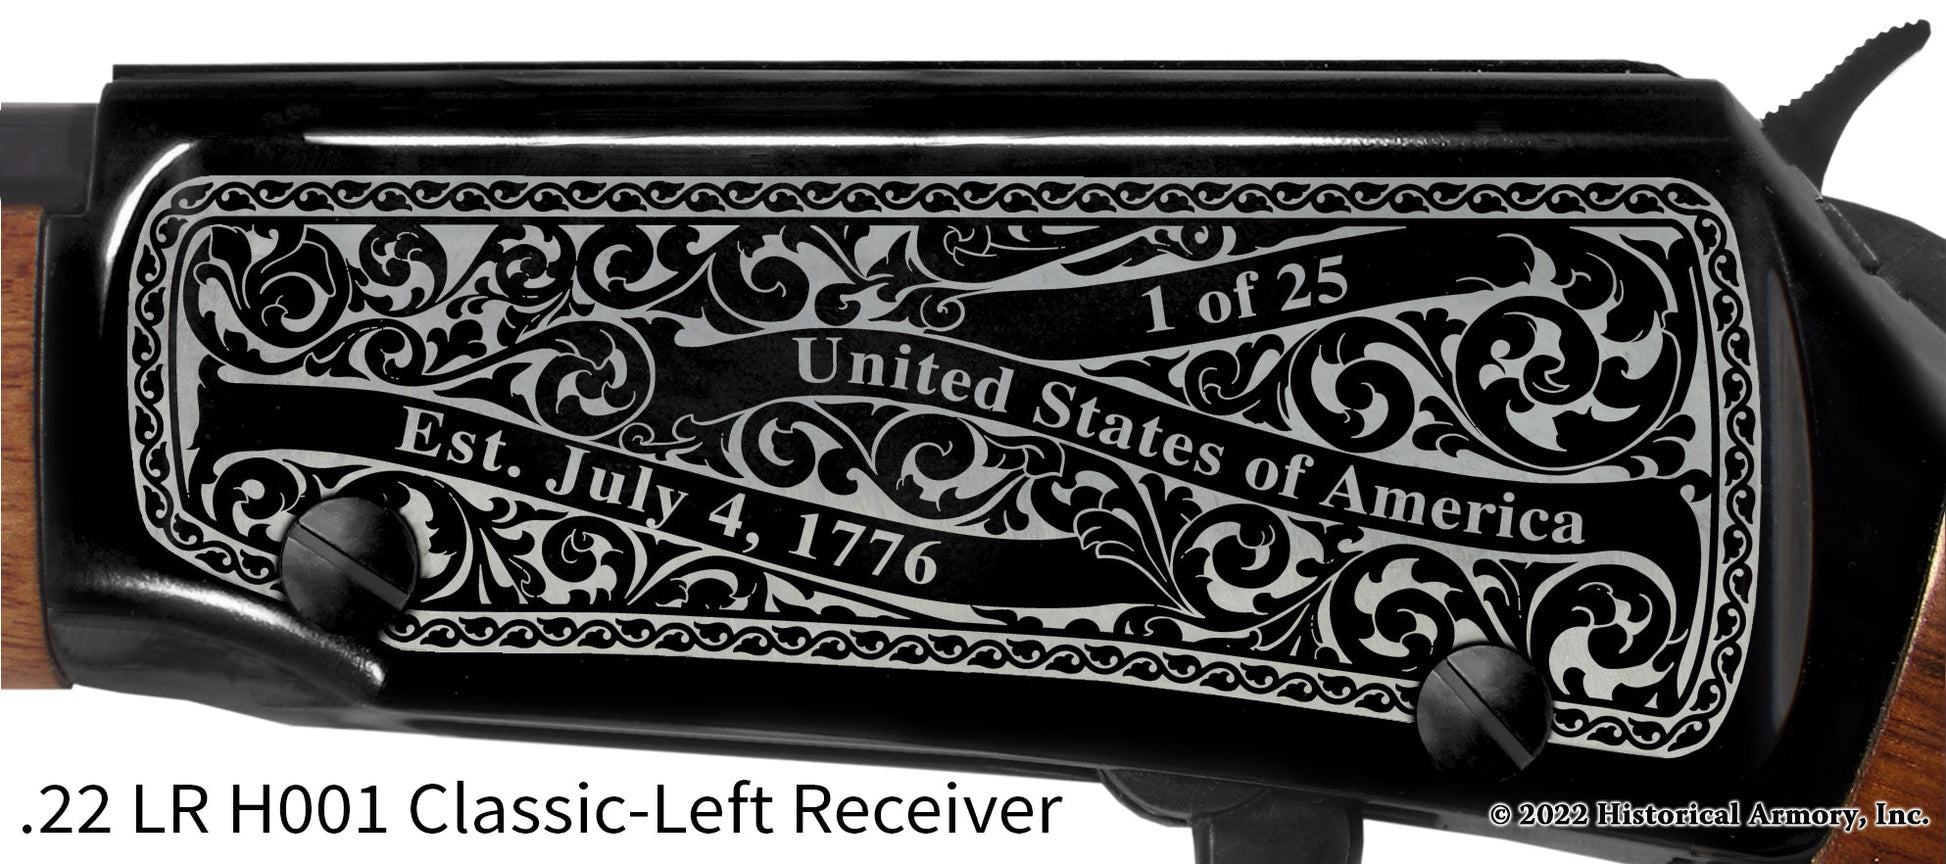 Hancock County Mississippi Engraved Henry H001 Rifle